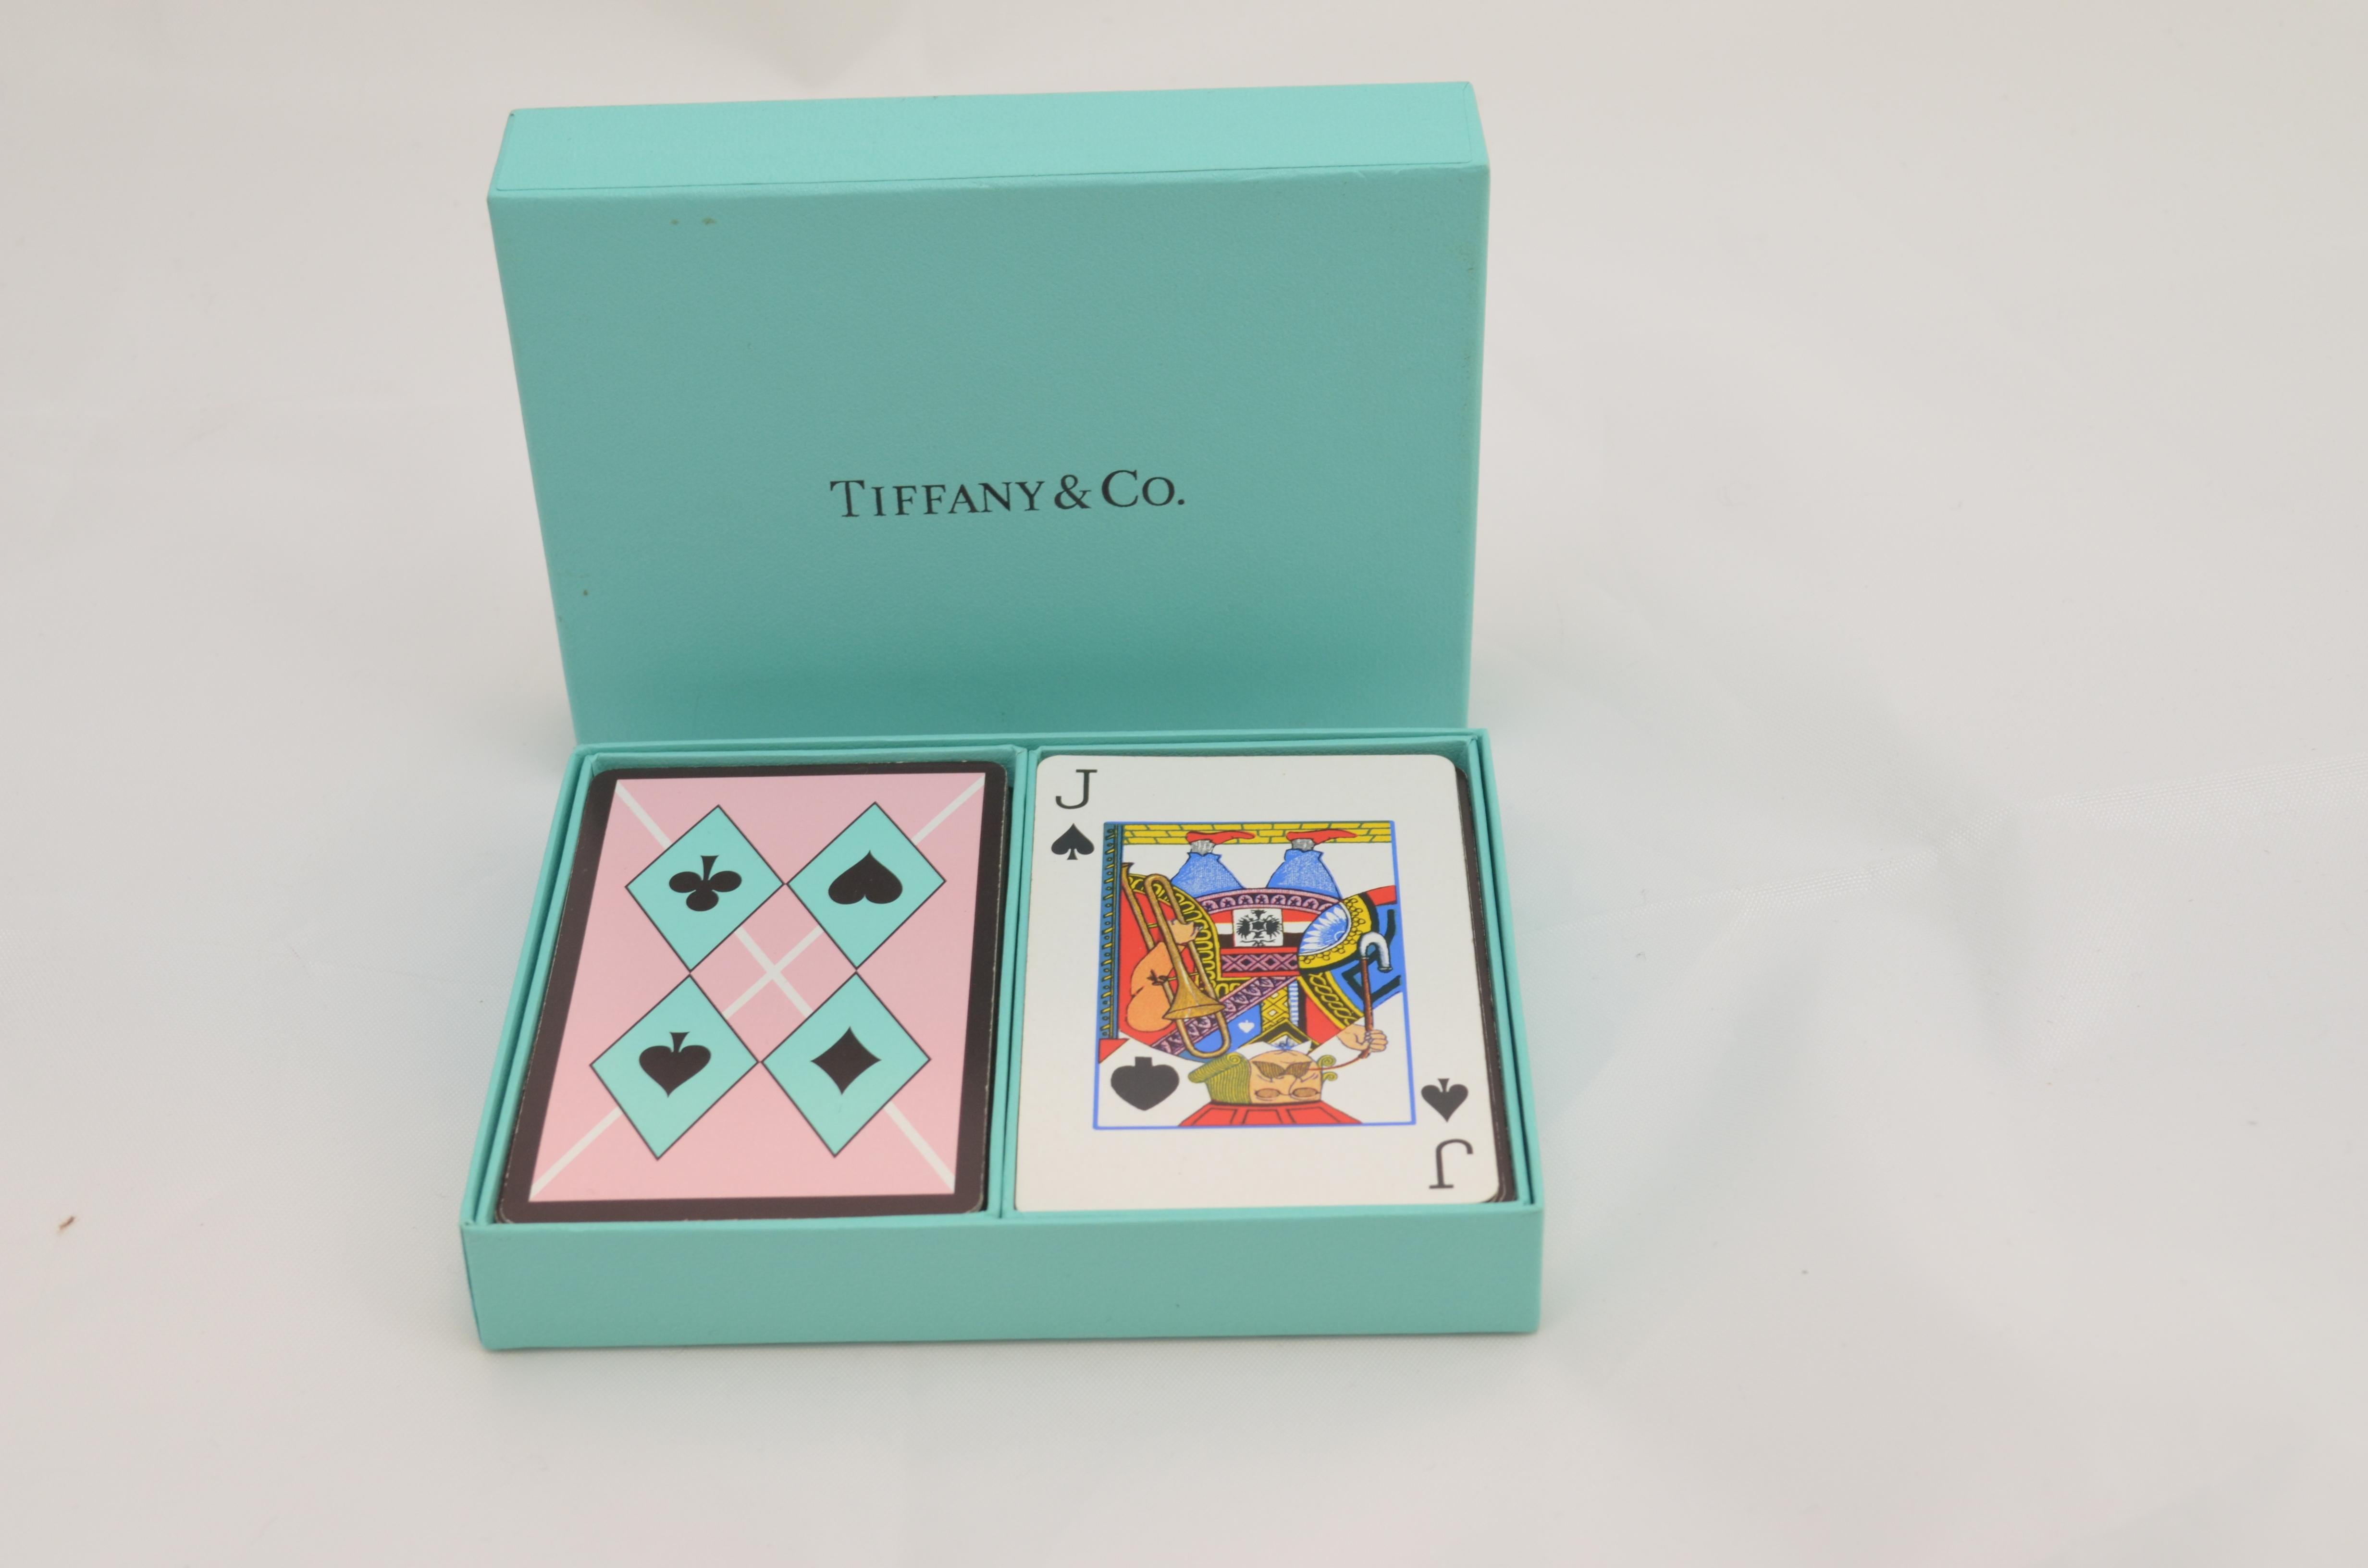 Tiffany & Co. Playing Cards Set -- Two sets of playing cards with a harlequin print in a signature Tiffany's blue box. Measures: 5 x 4 inches.